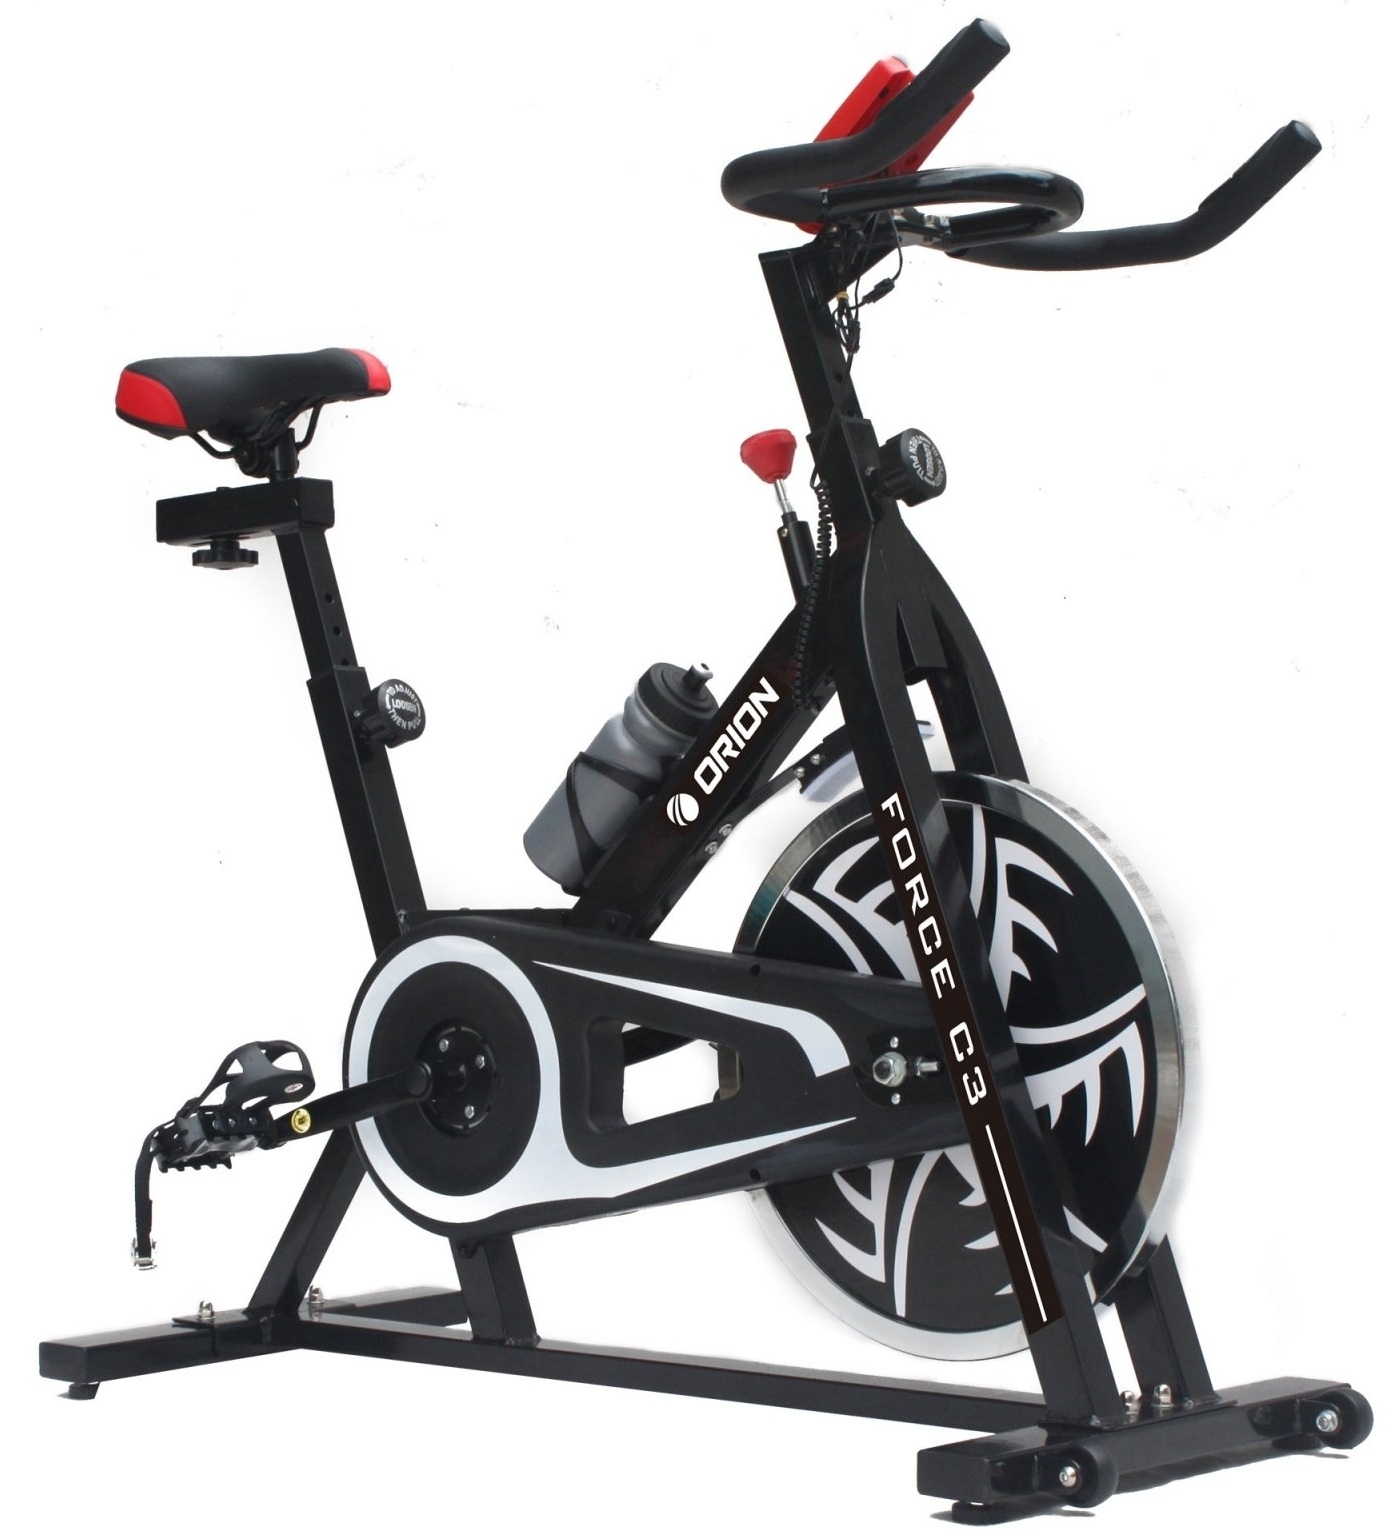 Bicicleta Indoor Cycling Orion Force C3